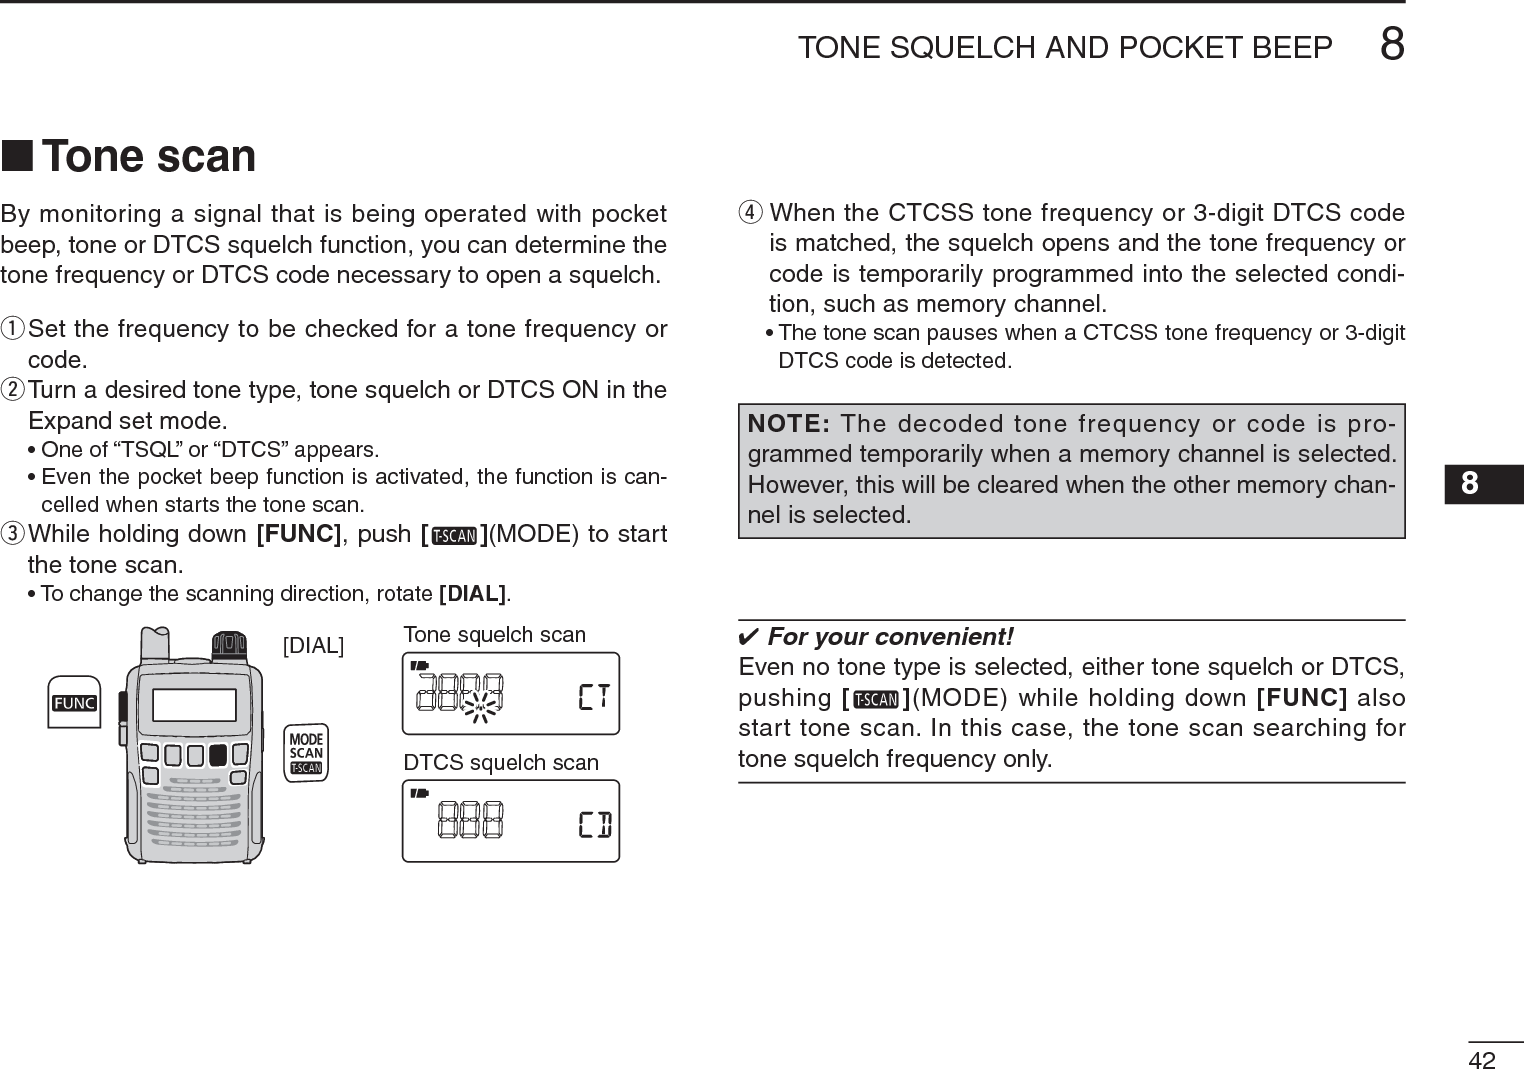 428TONE SQUELCH AND POCKET BEEP 8N Tone scanBy monitoring a signal that is being operated with pocket beep, tone or DTCS squelch function, you can determine the tone frequency or DTCS code necessary to open a squelch.q  Set the frequency to be checked for a tone frequency or code.w  Turn a desired tone type, tone squelch or DTCS ON in the Expand set mode.• One of “TSQL” or “DTCS” appears. • Even the pocket beep function is activated, the function is can-celled when starts the tone scan.e  While holding down [FUNC], push [ ](MODE) to start the tone scan.• To change the scanning direction, rotate [DIAL].[DIAL] Tone squelch scanDTCS squelch scanrWhen the CTCSS tone frequency or 3-digit DTCS code is matched, the squelch opens and the tone frequency or code is temporarily programmed into the selected condi-tion, such as memory channel.• The tone scan pauses when a CTCSS tone frequency or 3-digit DTCS code is detected.NOTE: The decoded tone frequency or code is pro-grammed temporarily when a memory channel is selected. However, this will be cleared when the other memory chan-nel is selected. For your convenient!Even no tone type is selected, either tone squelch or DTCS, pushing [ ](MODE) while holding down [FUNC] also start tone scan. In this case, the tone scan searching for tone squelch frequency only.